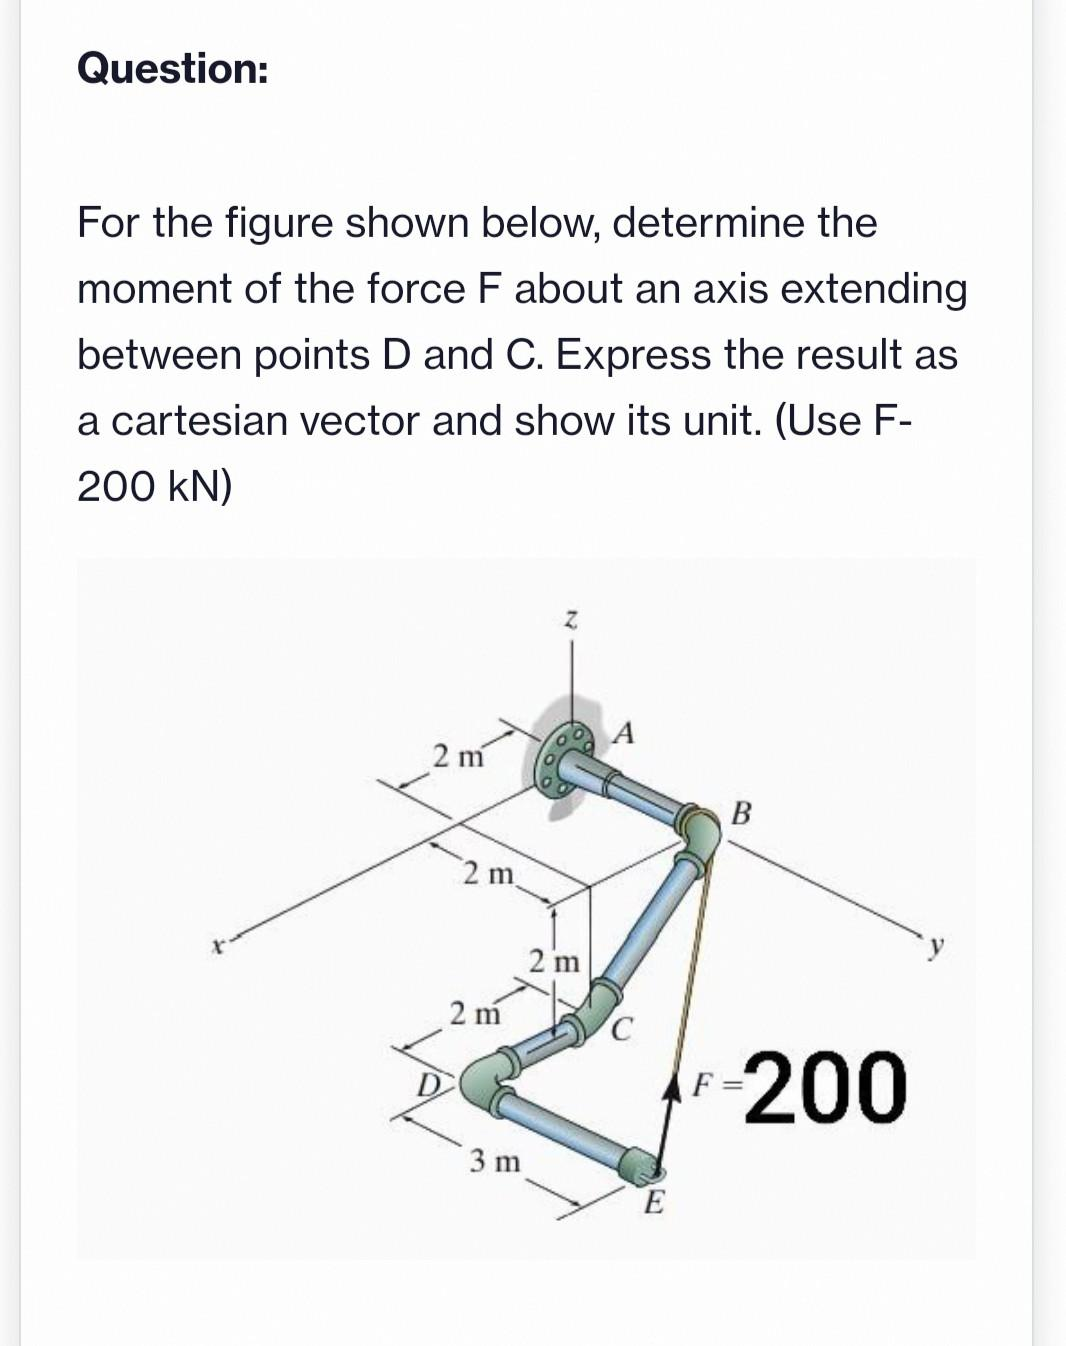 Question:
For the figure shown below, determine the
moment of the force F about an axis extending
between points D and C. Express the result as
a cartesian vector and show its unit. (Use F-
200 KN)
2 m
2 m
2 m
3 m
2 m
E
F
B
200